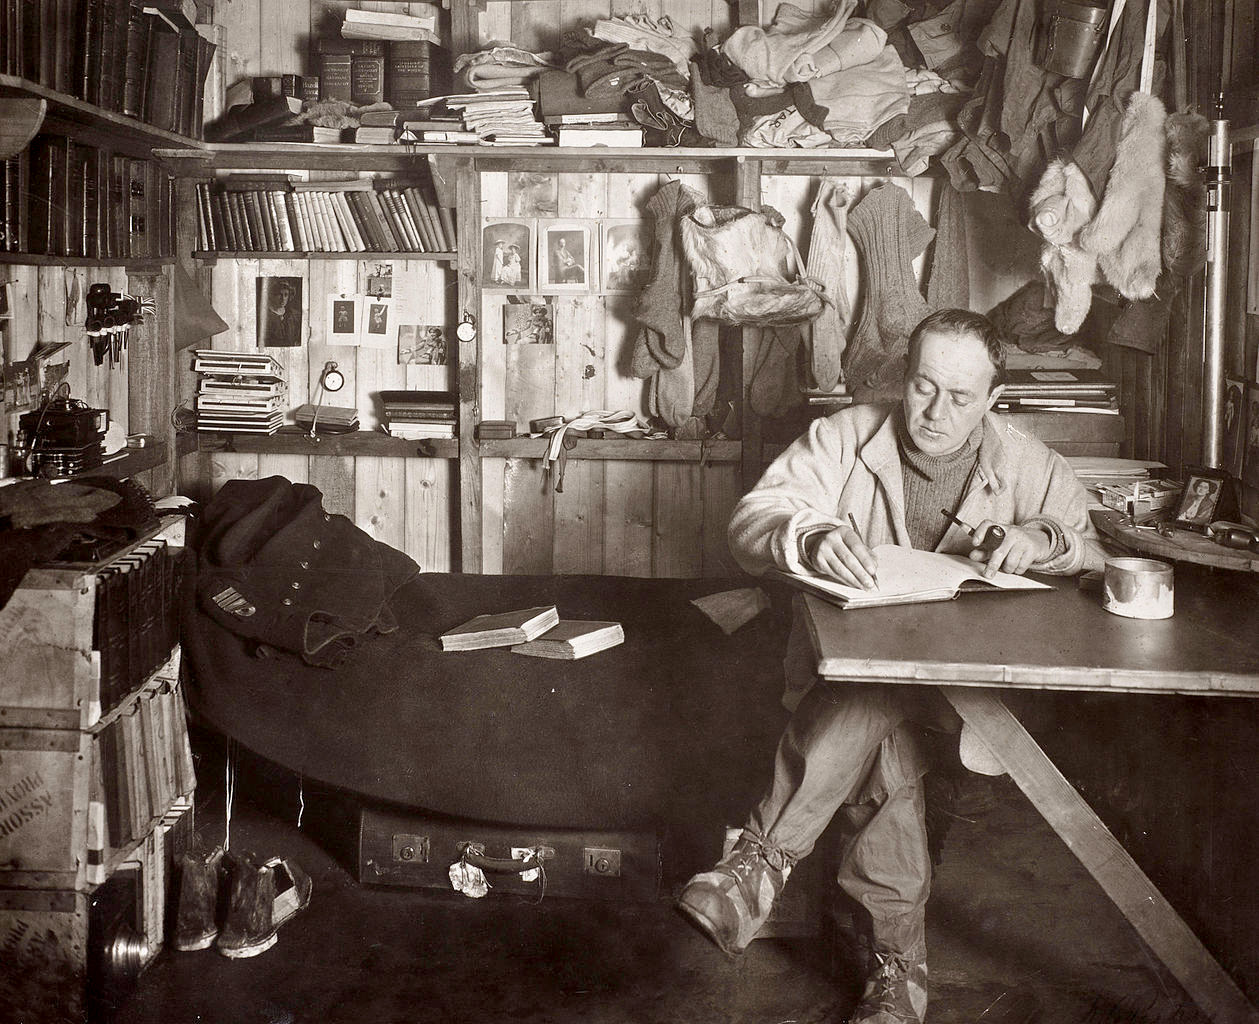 Captain Robert Falcon Scott writing in his diary, Cape Evans hut, 7th October 1911